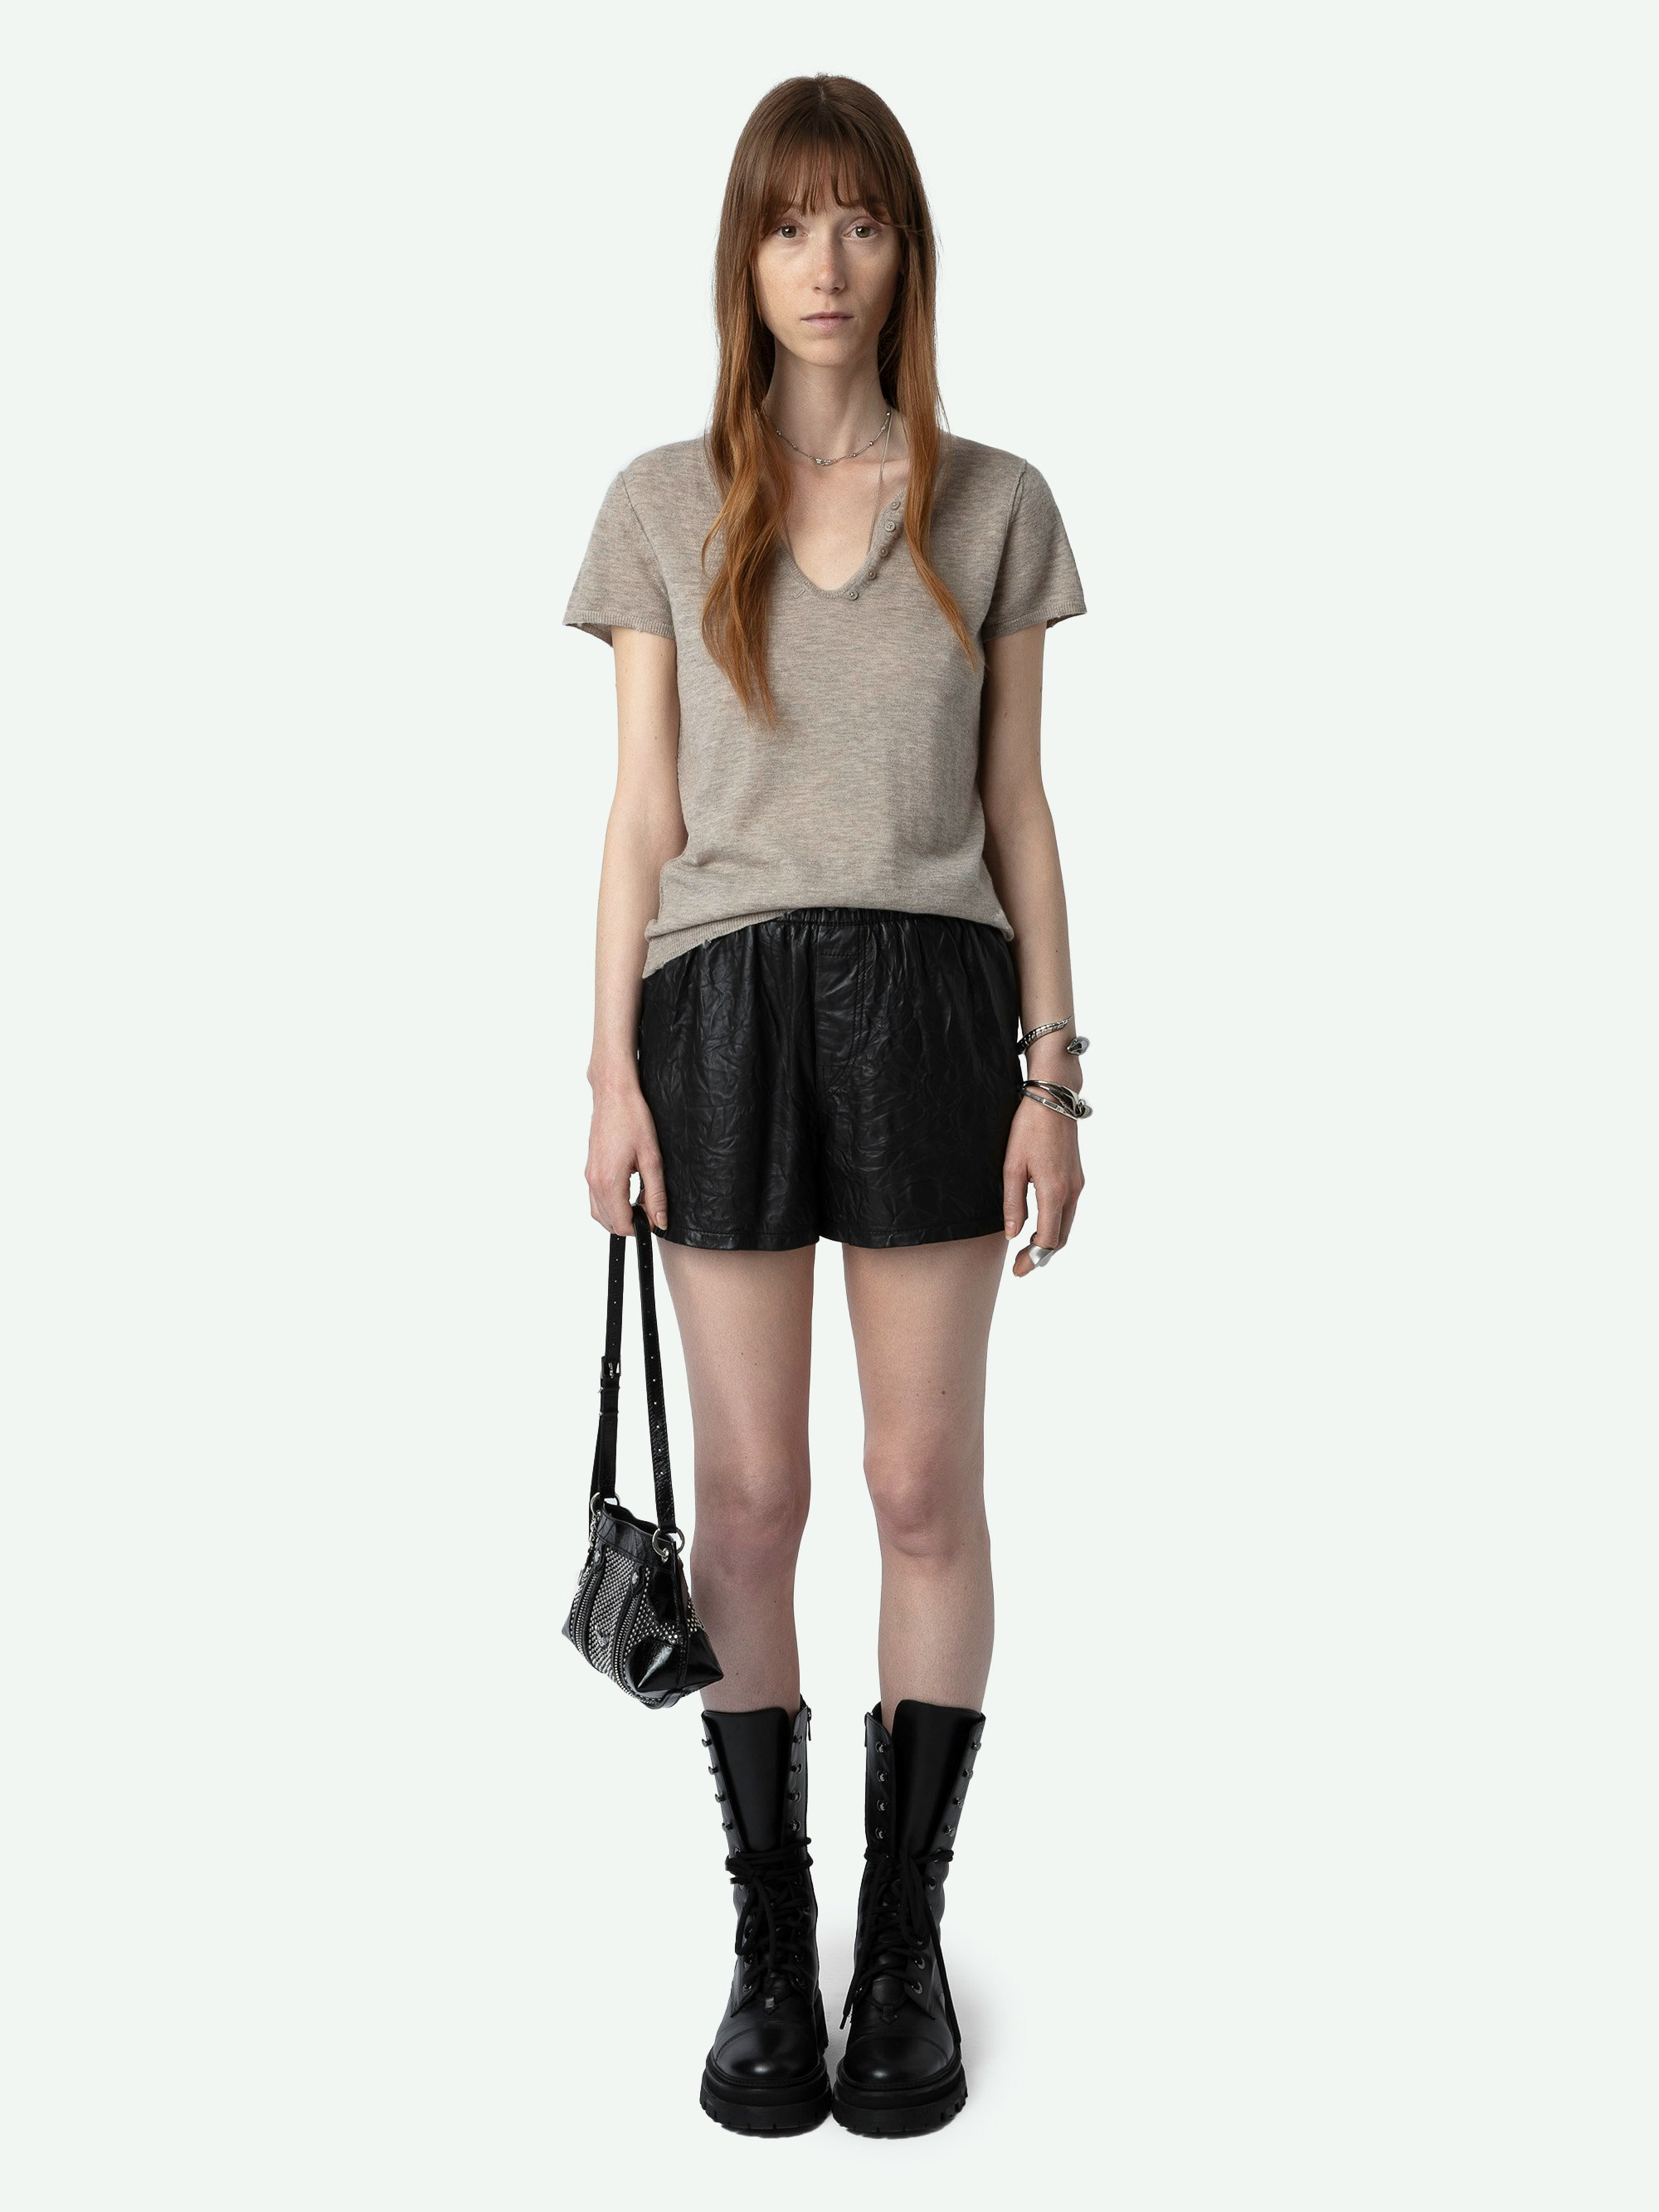 Celsy Cashmere Sweater - Short-sleeved feather cashmere Henley sweater with wings embroidered on the back and distressed-effect edges.